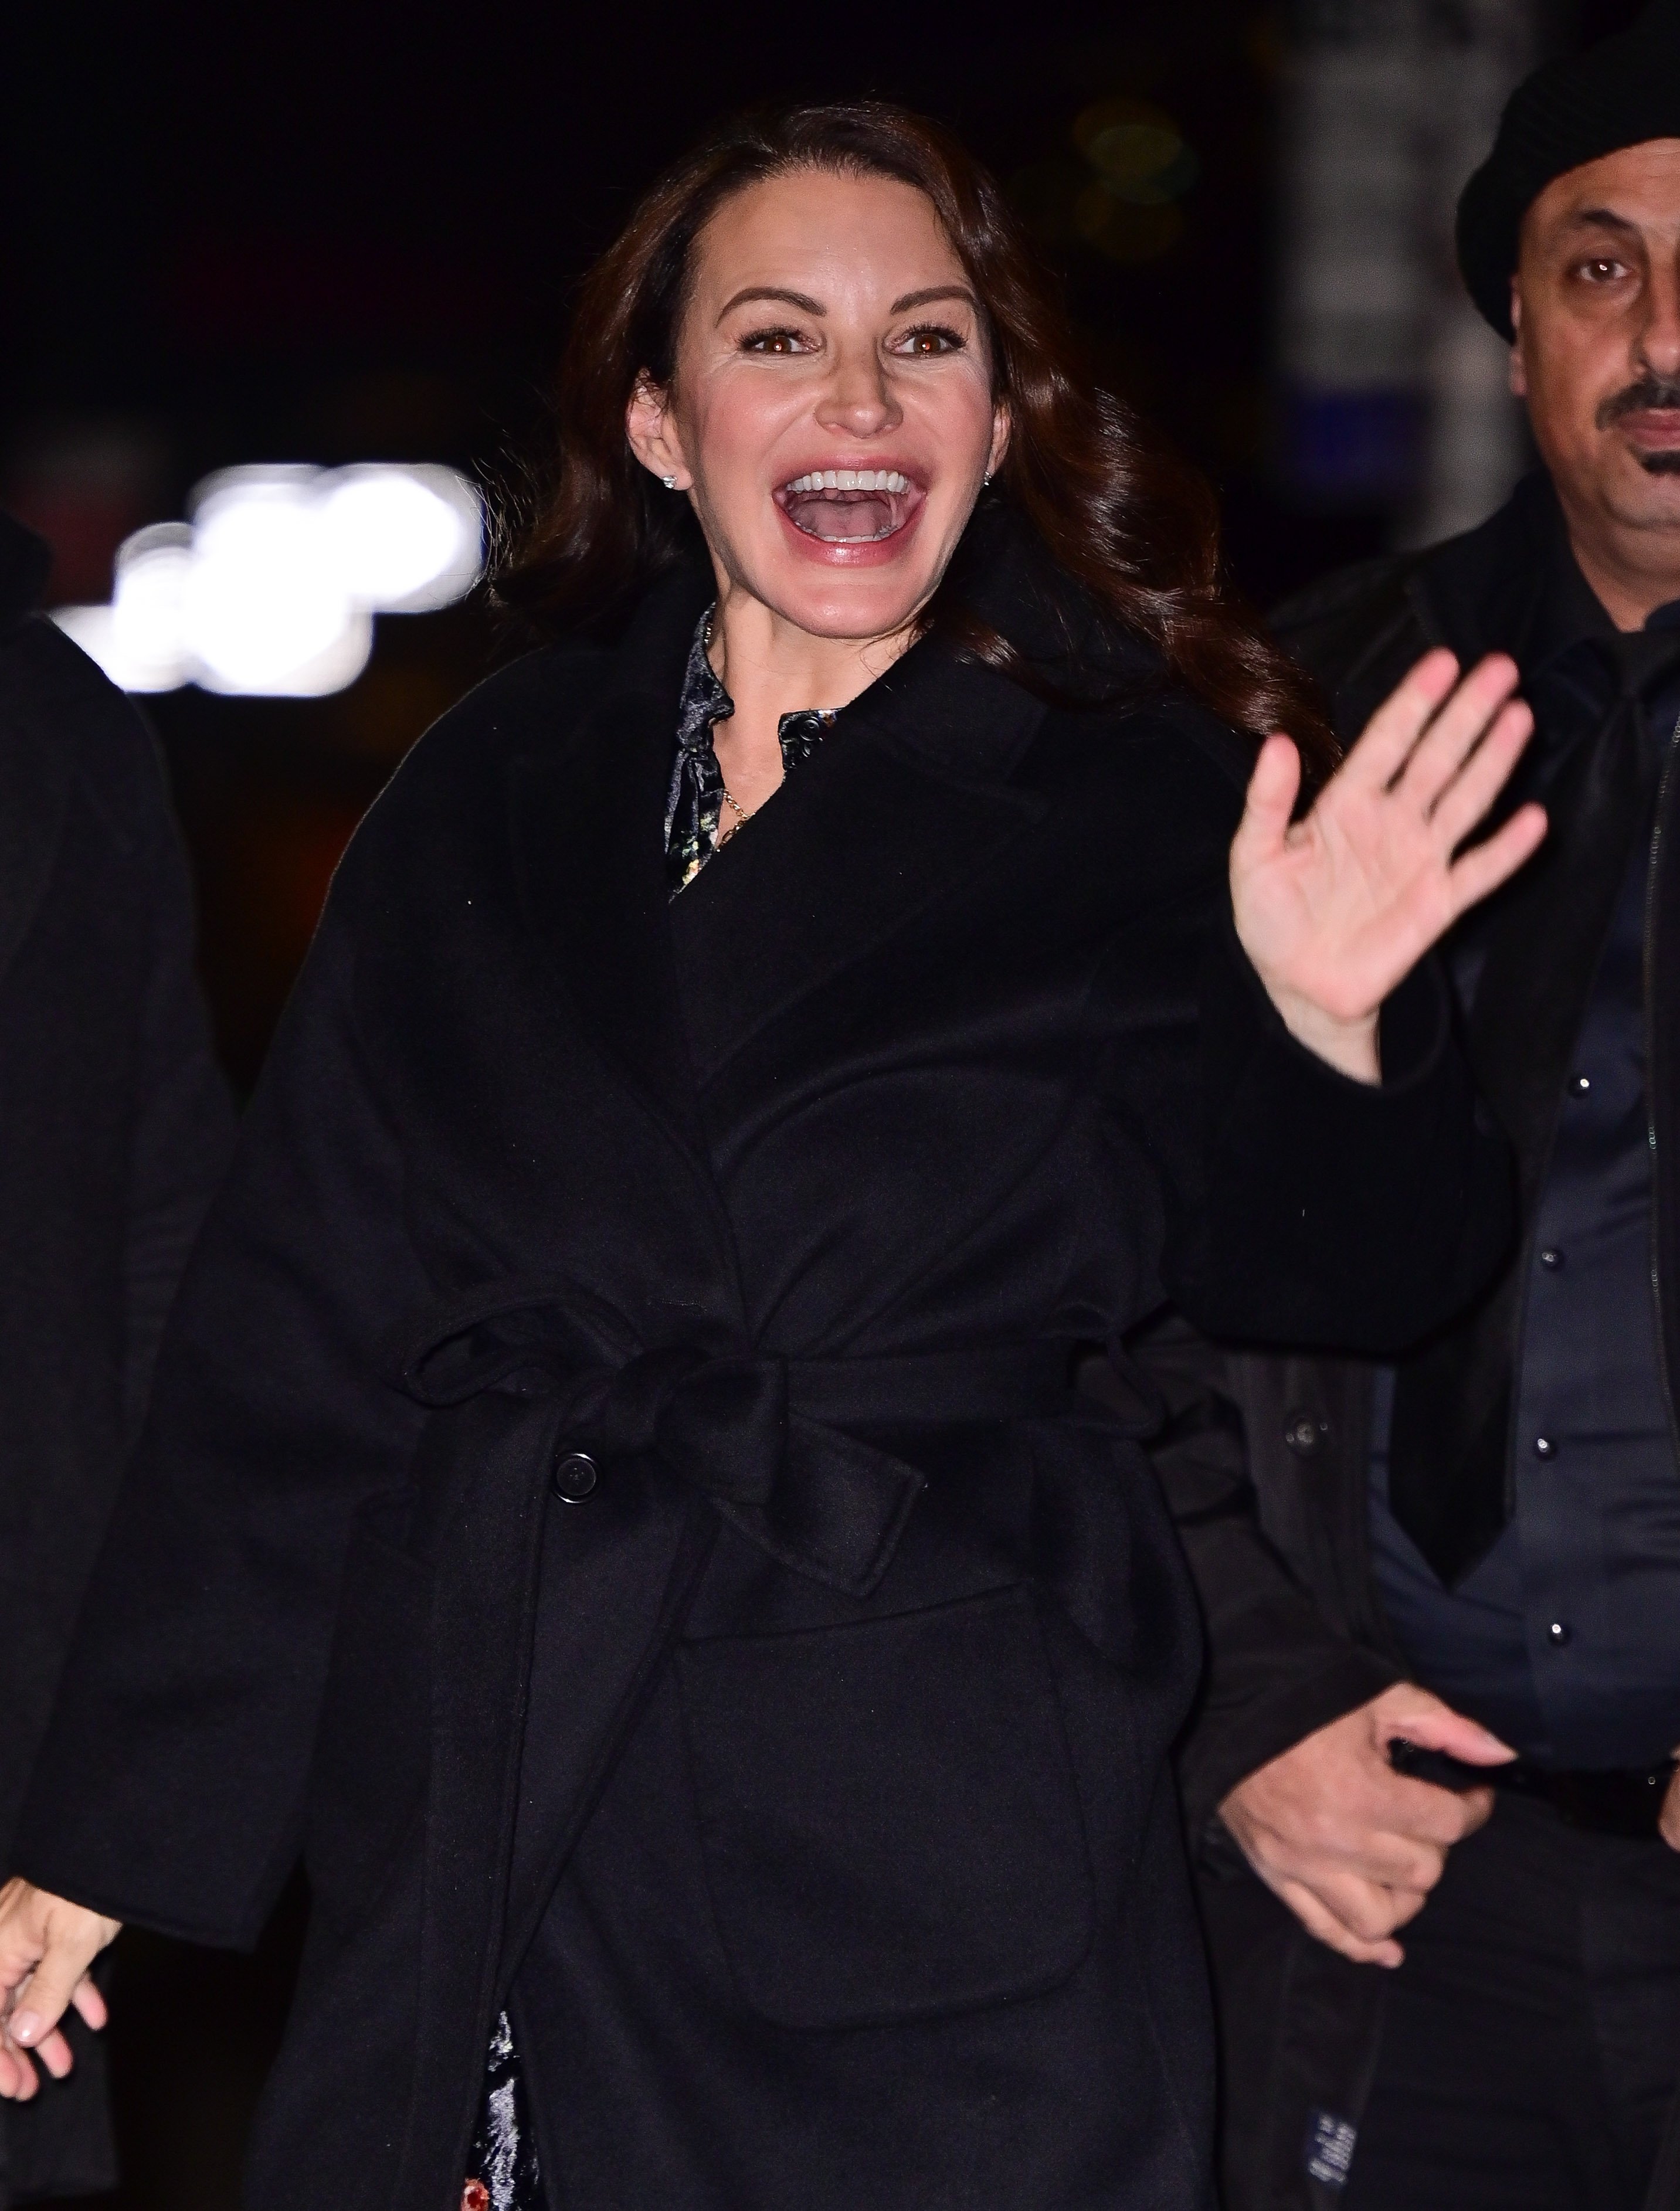 Kristin Davis is photographed as she arrives at the Ed Sullivan Theater for "The Late Show With Stephen Colbert" on December 7, 2021 in New York City.